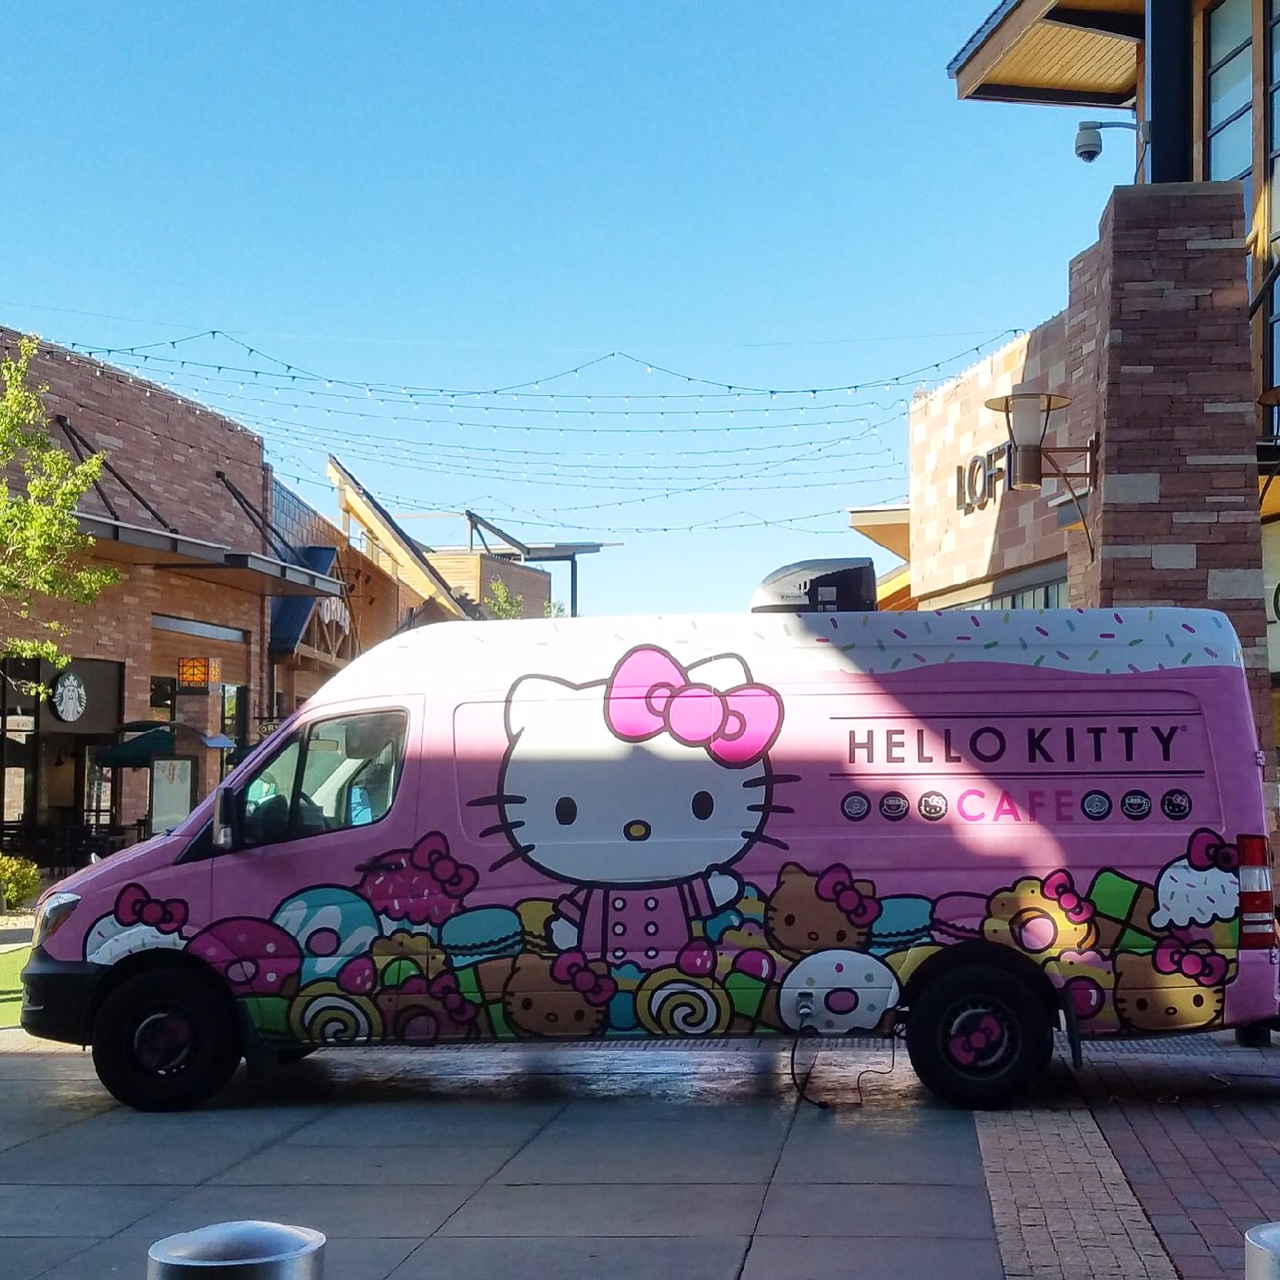 Hello Kitty Cafe is coming to town!